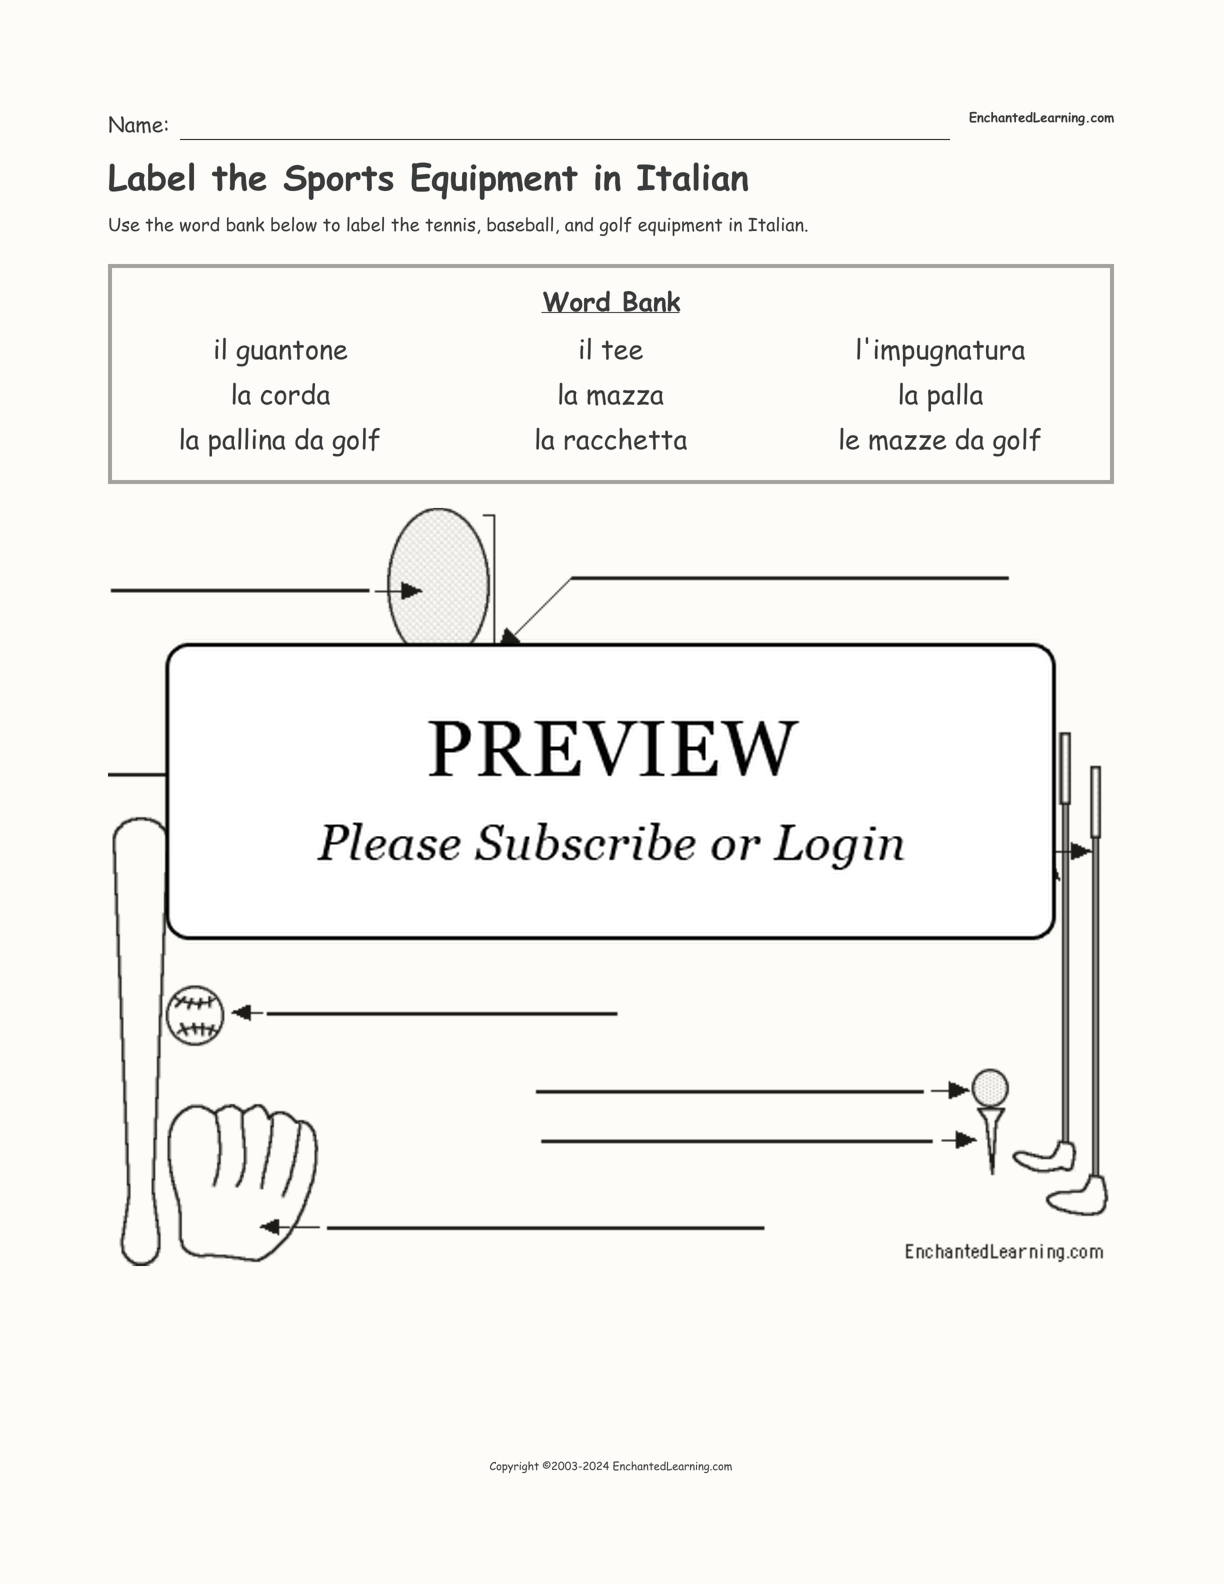 Label the Sports Equipment in Italian interactive worksheet page 1